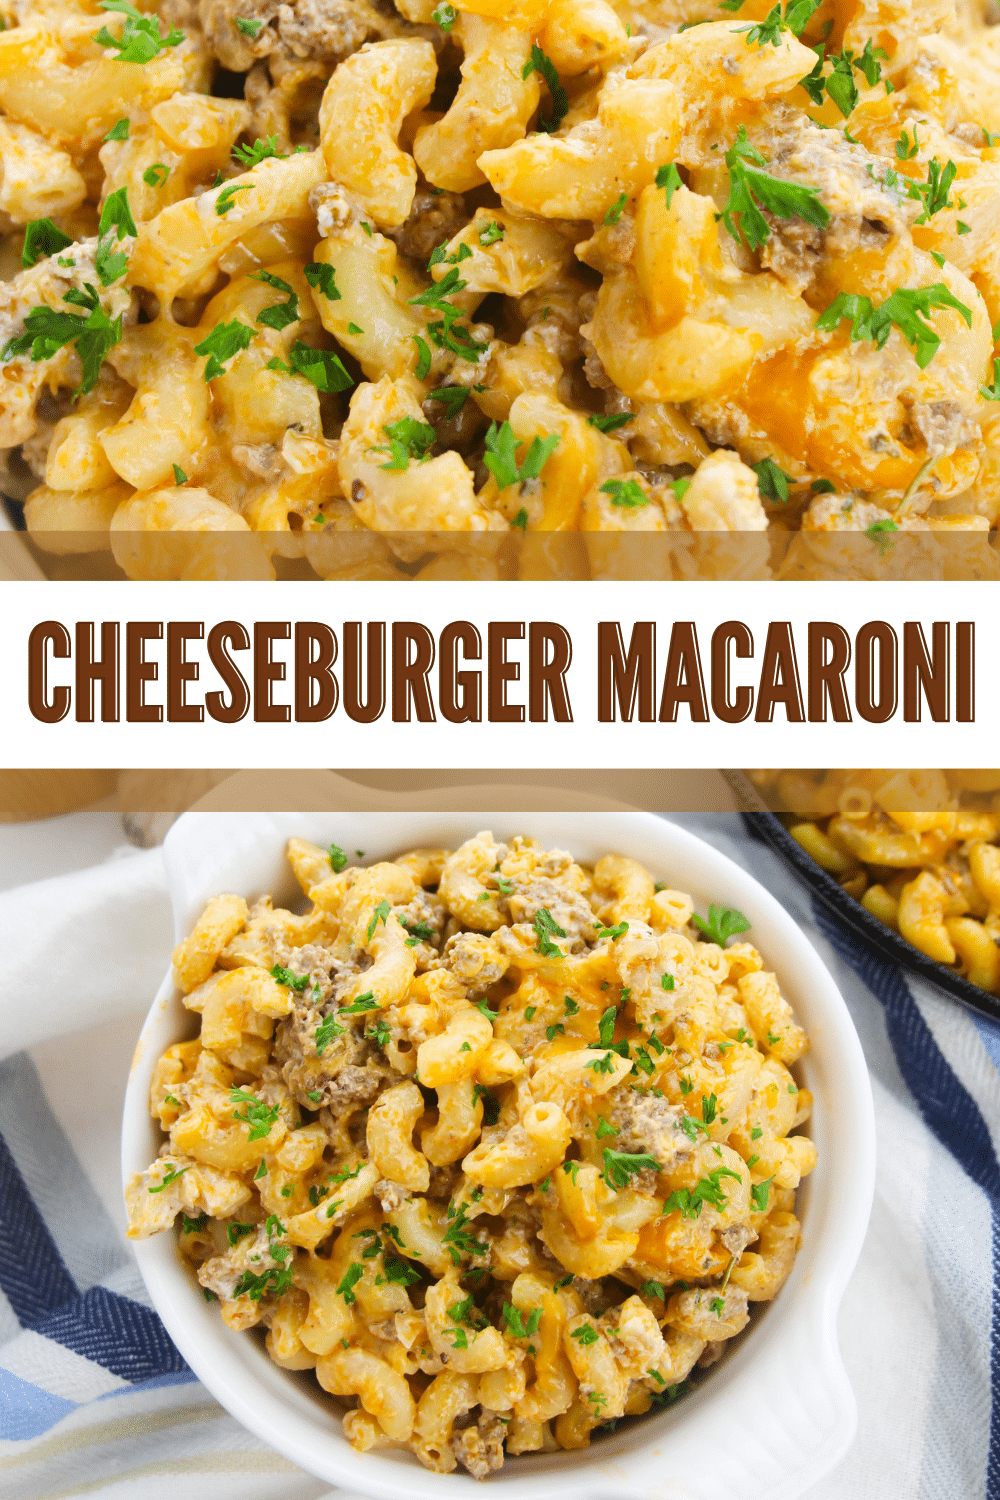 This Cheeseburger Macaroni is easy to make, cheesy, and oh so delicious. Your entire family will love this quick weeknight meal. #cheeseburgermacaroni #onepotmeal #homemadehamburgerhelper #pasta #dinnerrecipe via @wondermomwannab